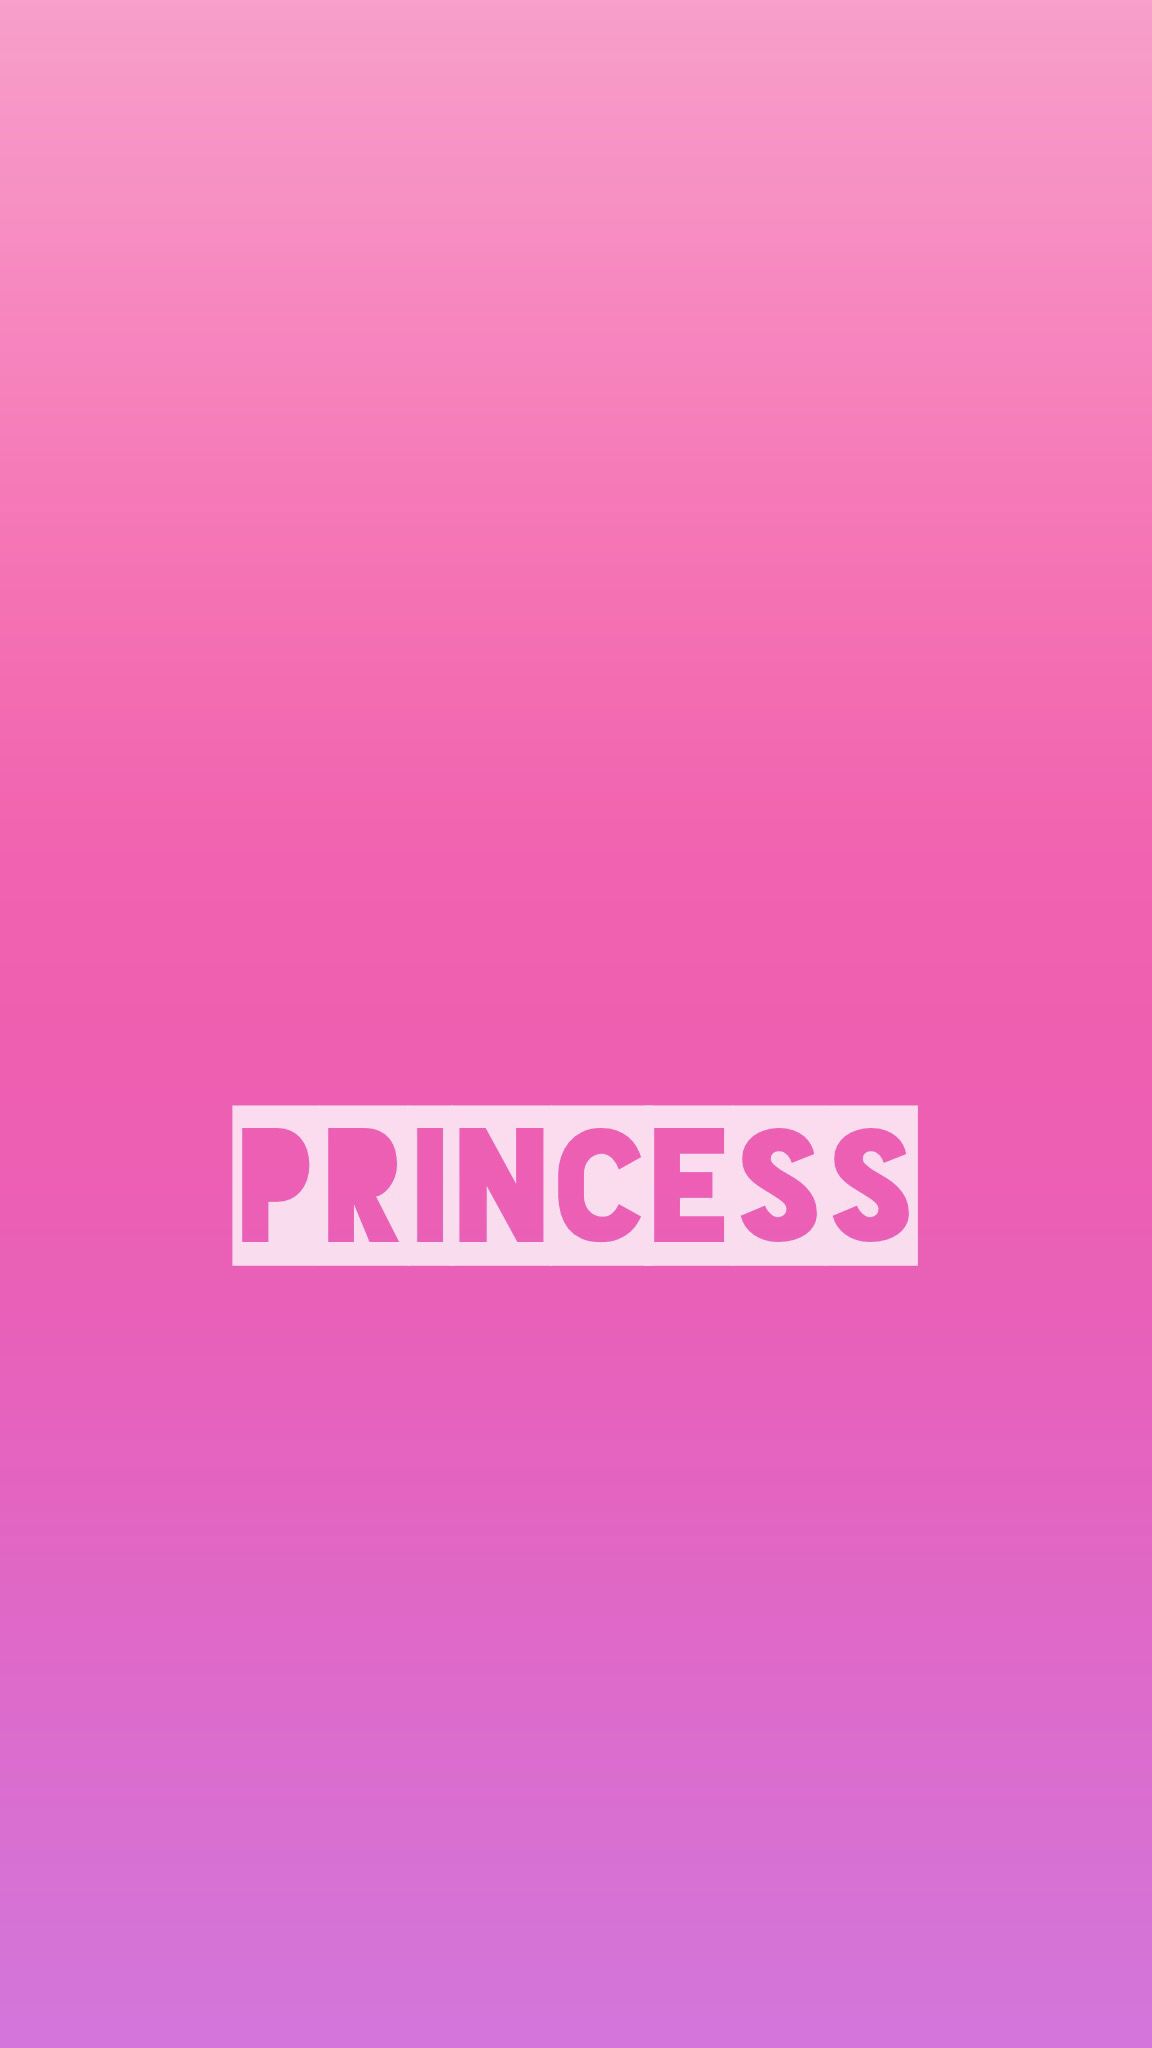 quote, inspiration, wallpaper, background, minimal, white, black, simple, iPhone, princess, pink. Wallpaper iphone quotes, iPhone wallpaper, Wallpaper background